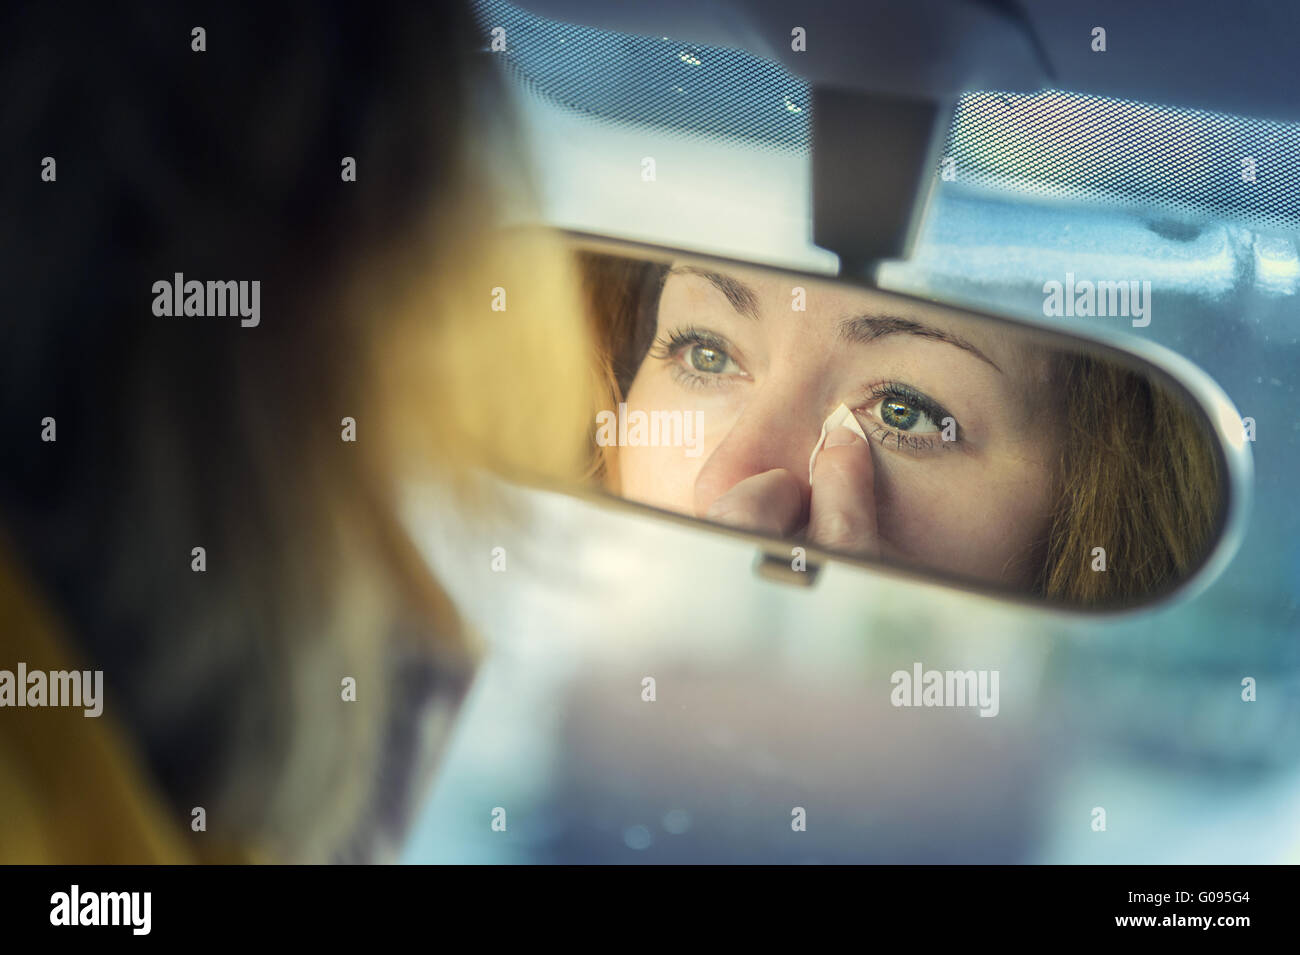 young woman looks in the rearview mirror Stock Photo